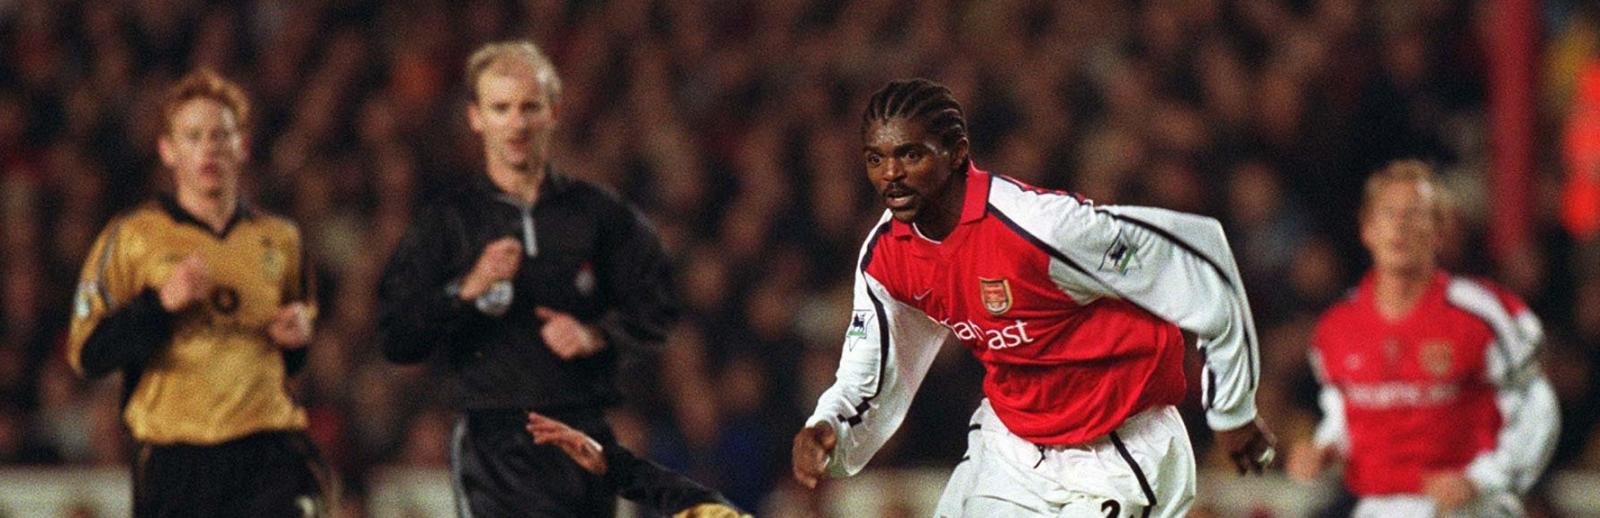 Where are they now? The Arsenal XI that battered Man United 4-0 in 2001